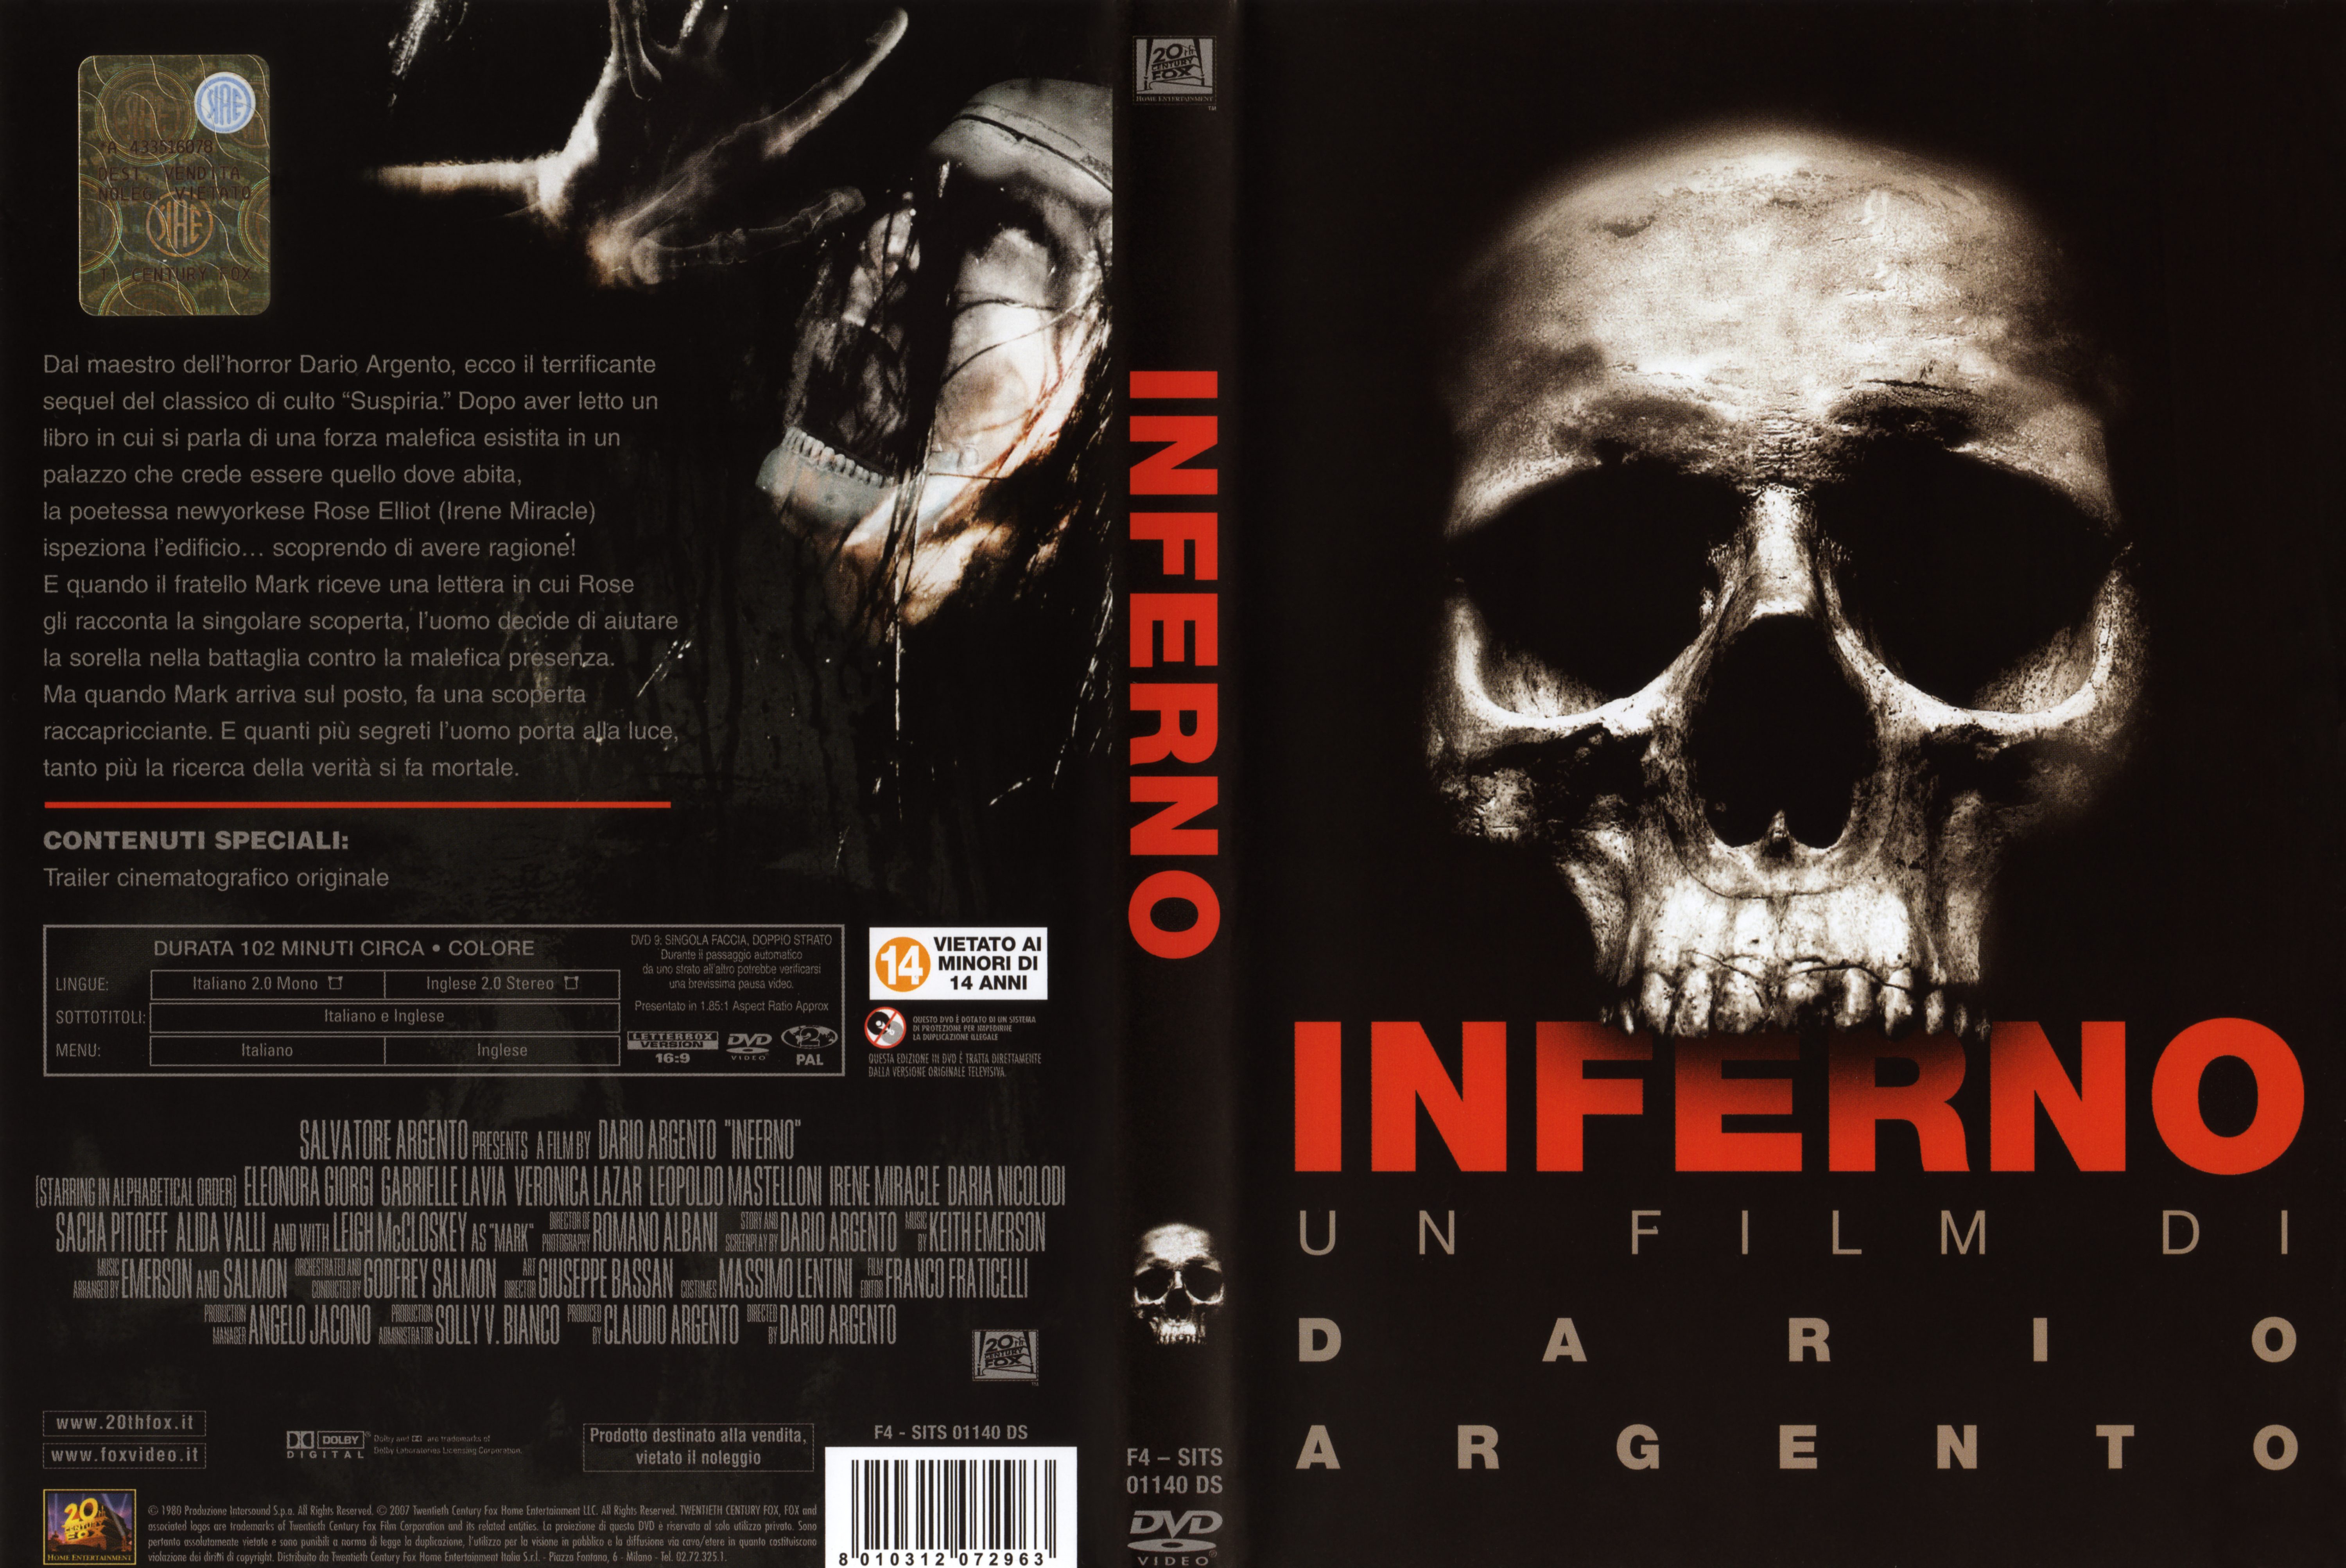 Jaquette DVD Inferno (1979) Zone 1